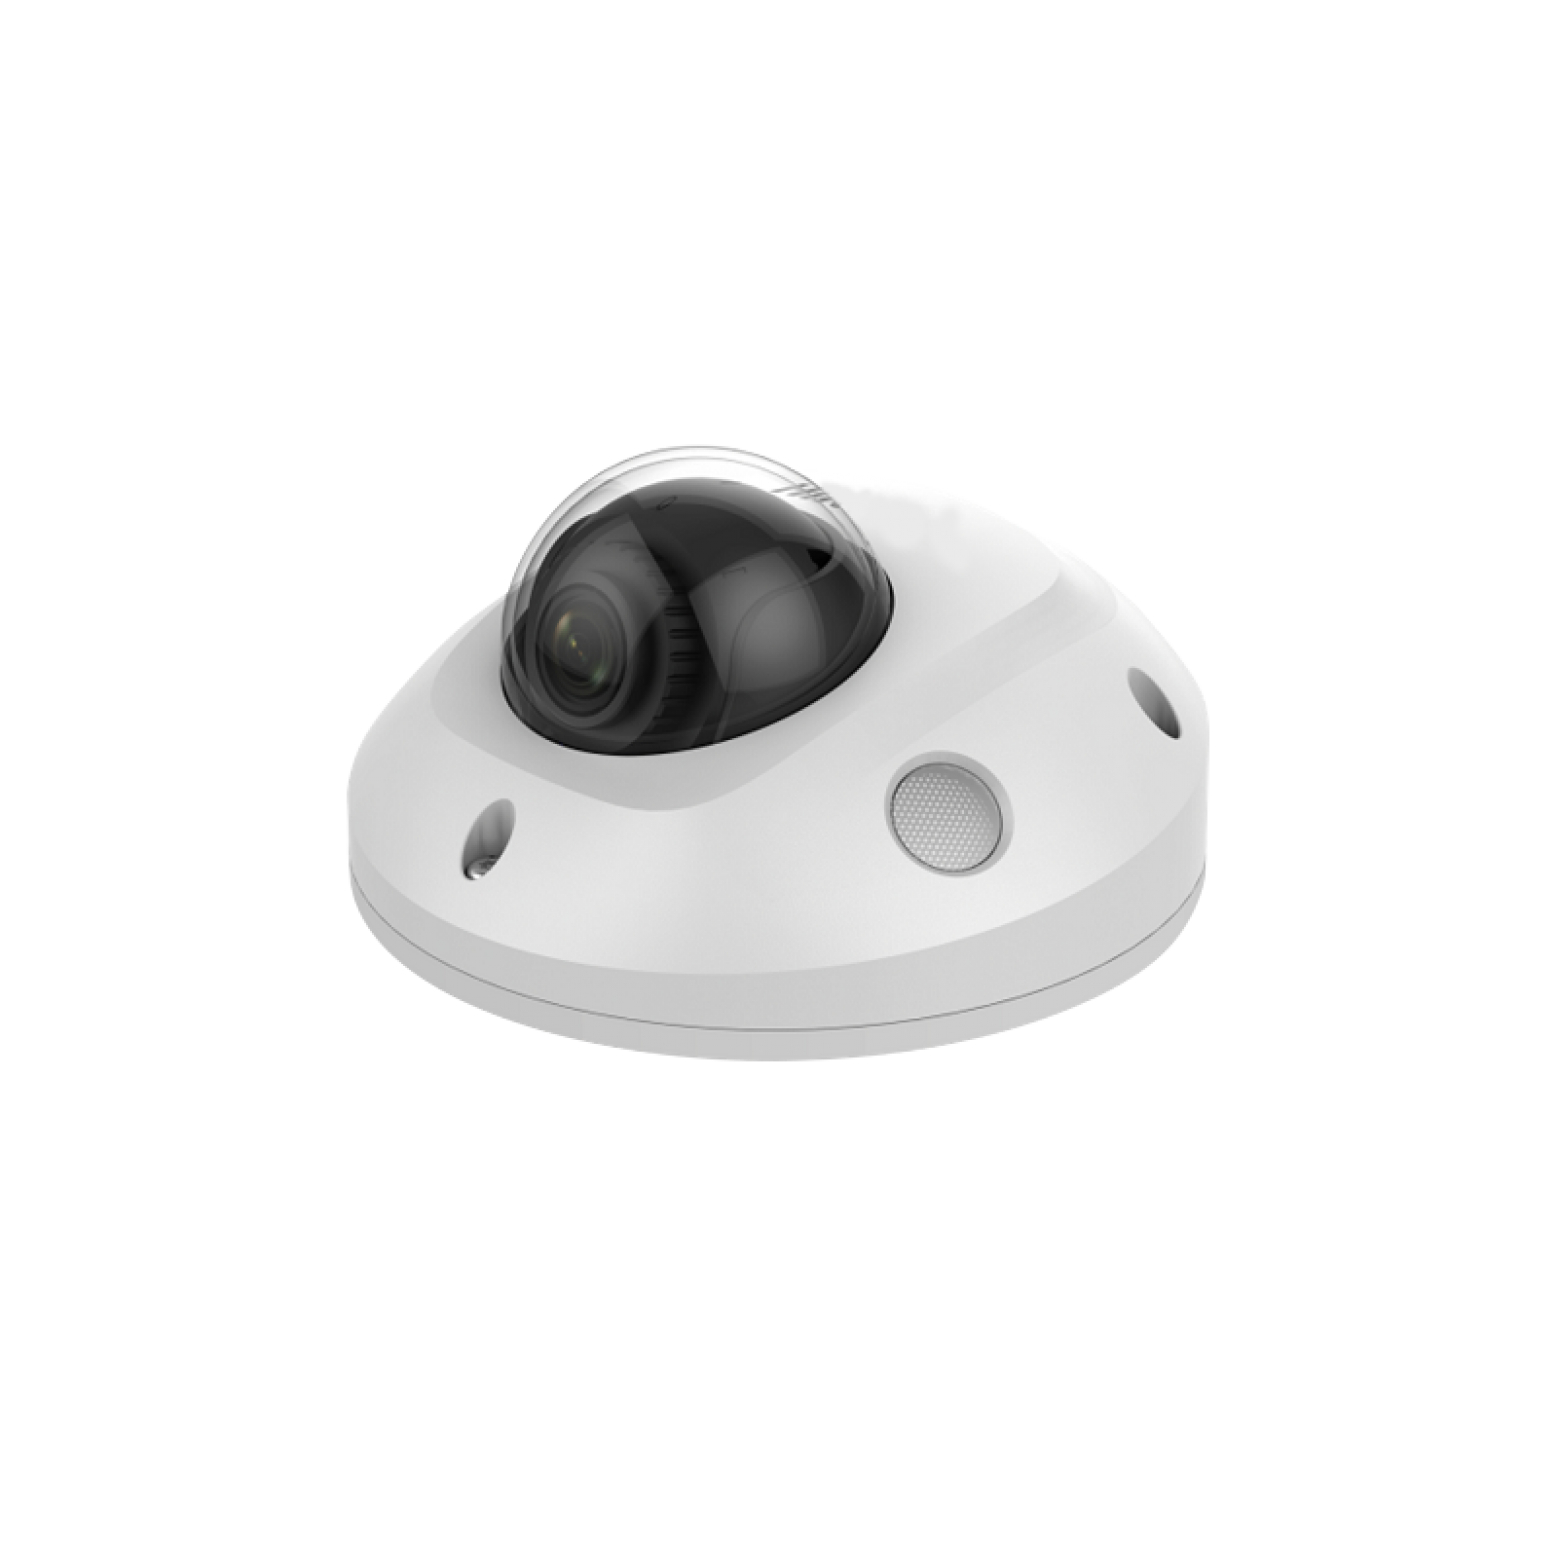 Safire SF-IPDM810WH-4, 4 Megapixel, WiFi, Dome Camera